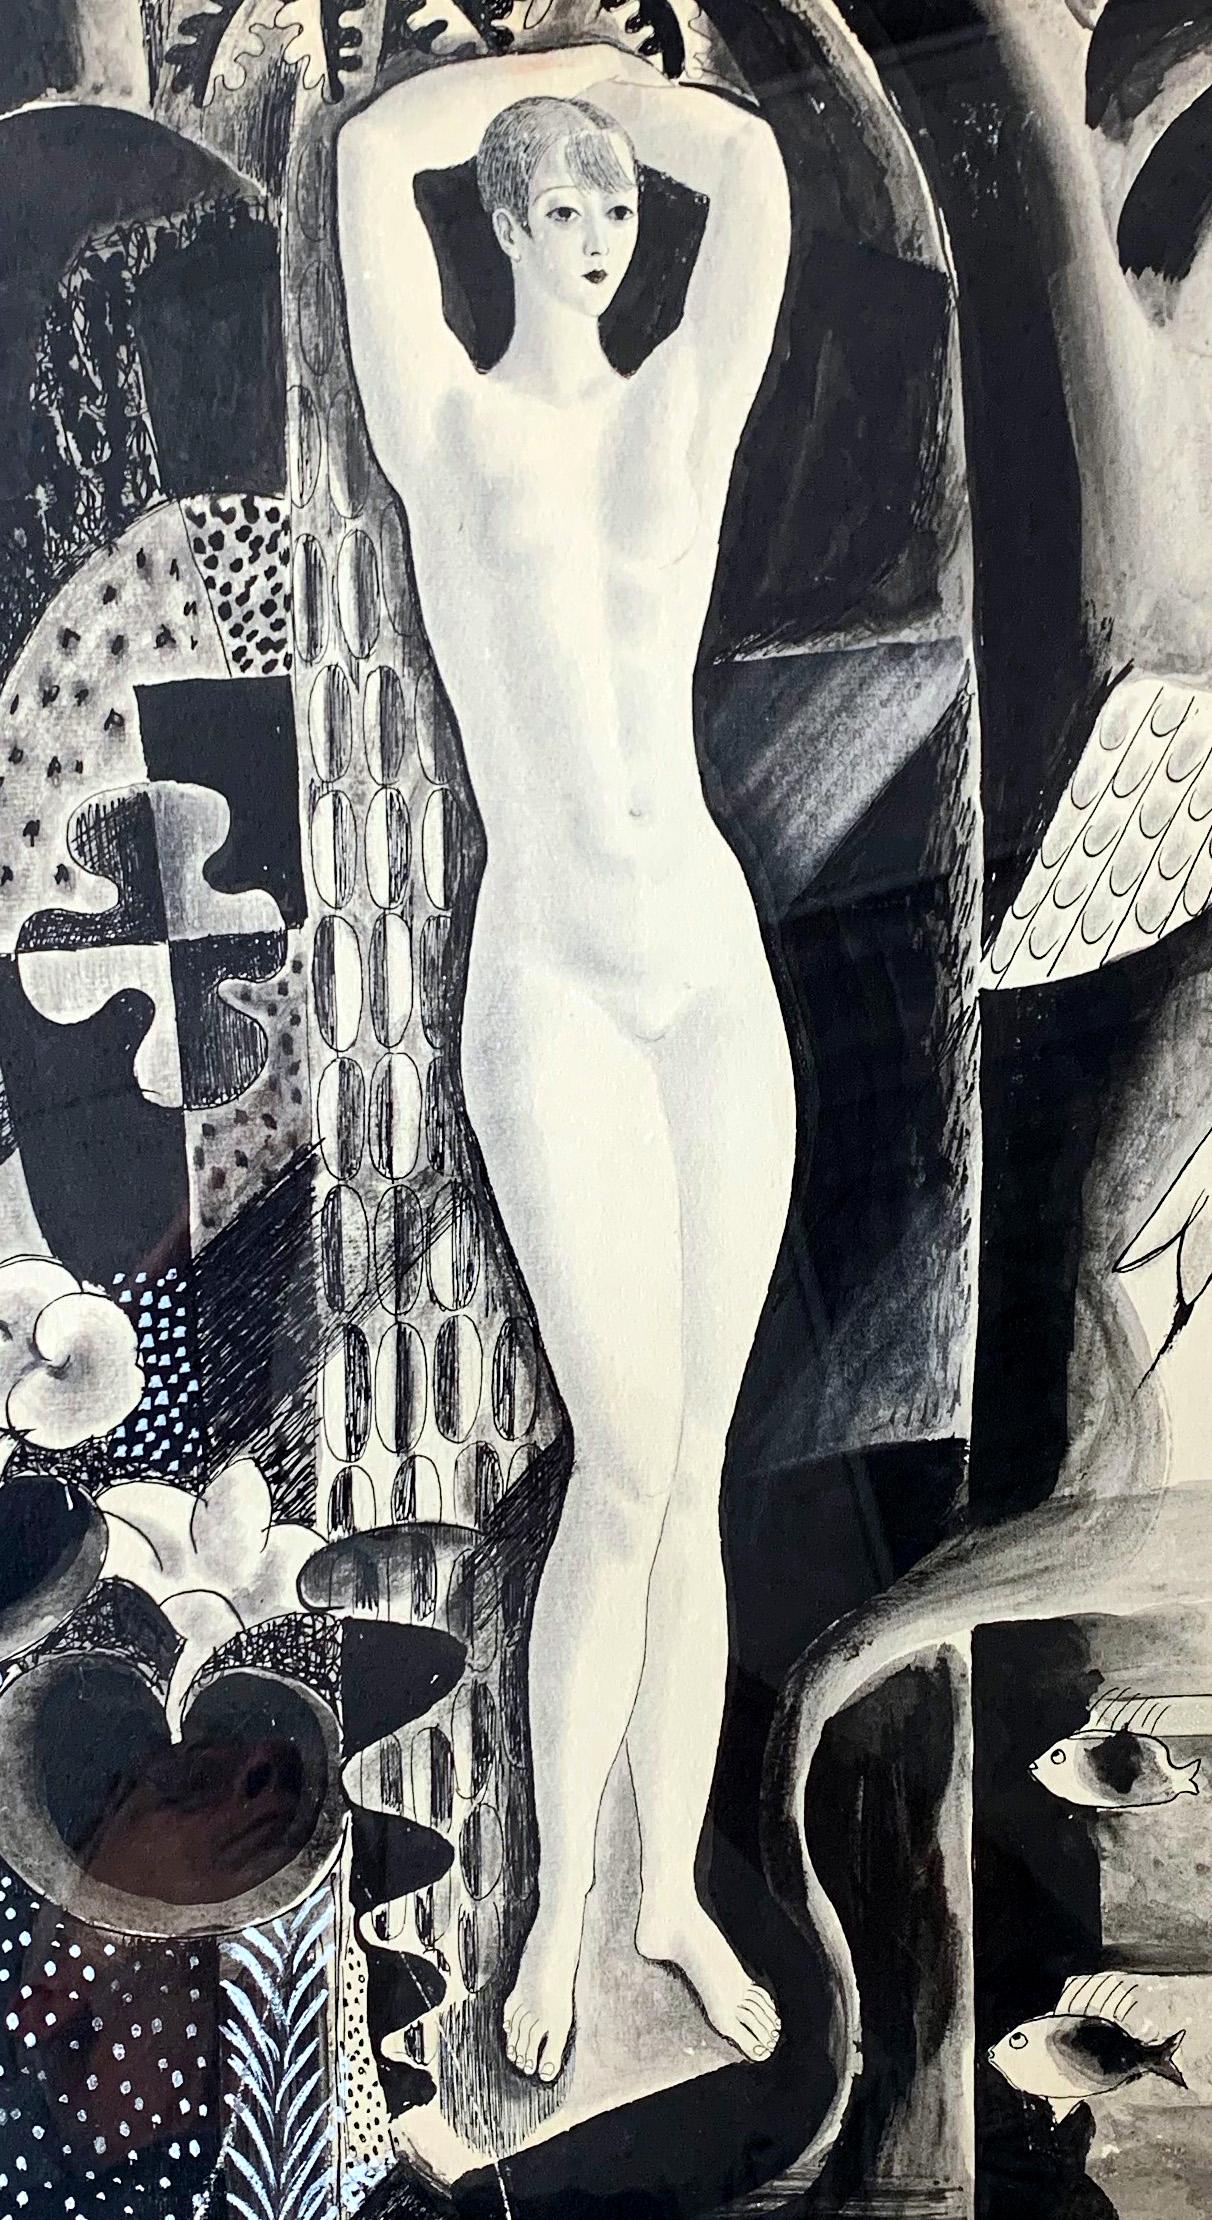 One of the finest artworks we have ever seen by famed Radio City Music Hall artist, Eduard Buk Ulreich, this ink and gouache drawing depicts a slender, statuesque female nude surrounded by a complex, Cubist network of trees, deer, fish and exotic